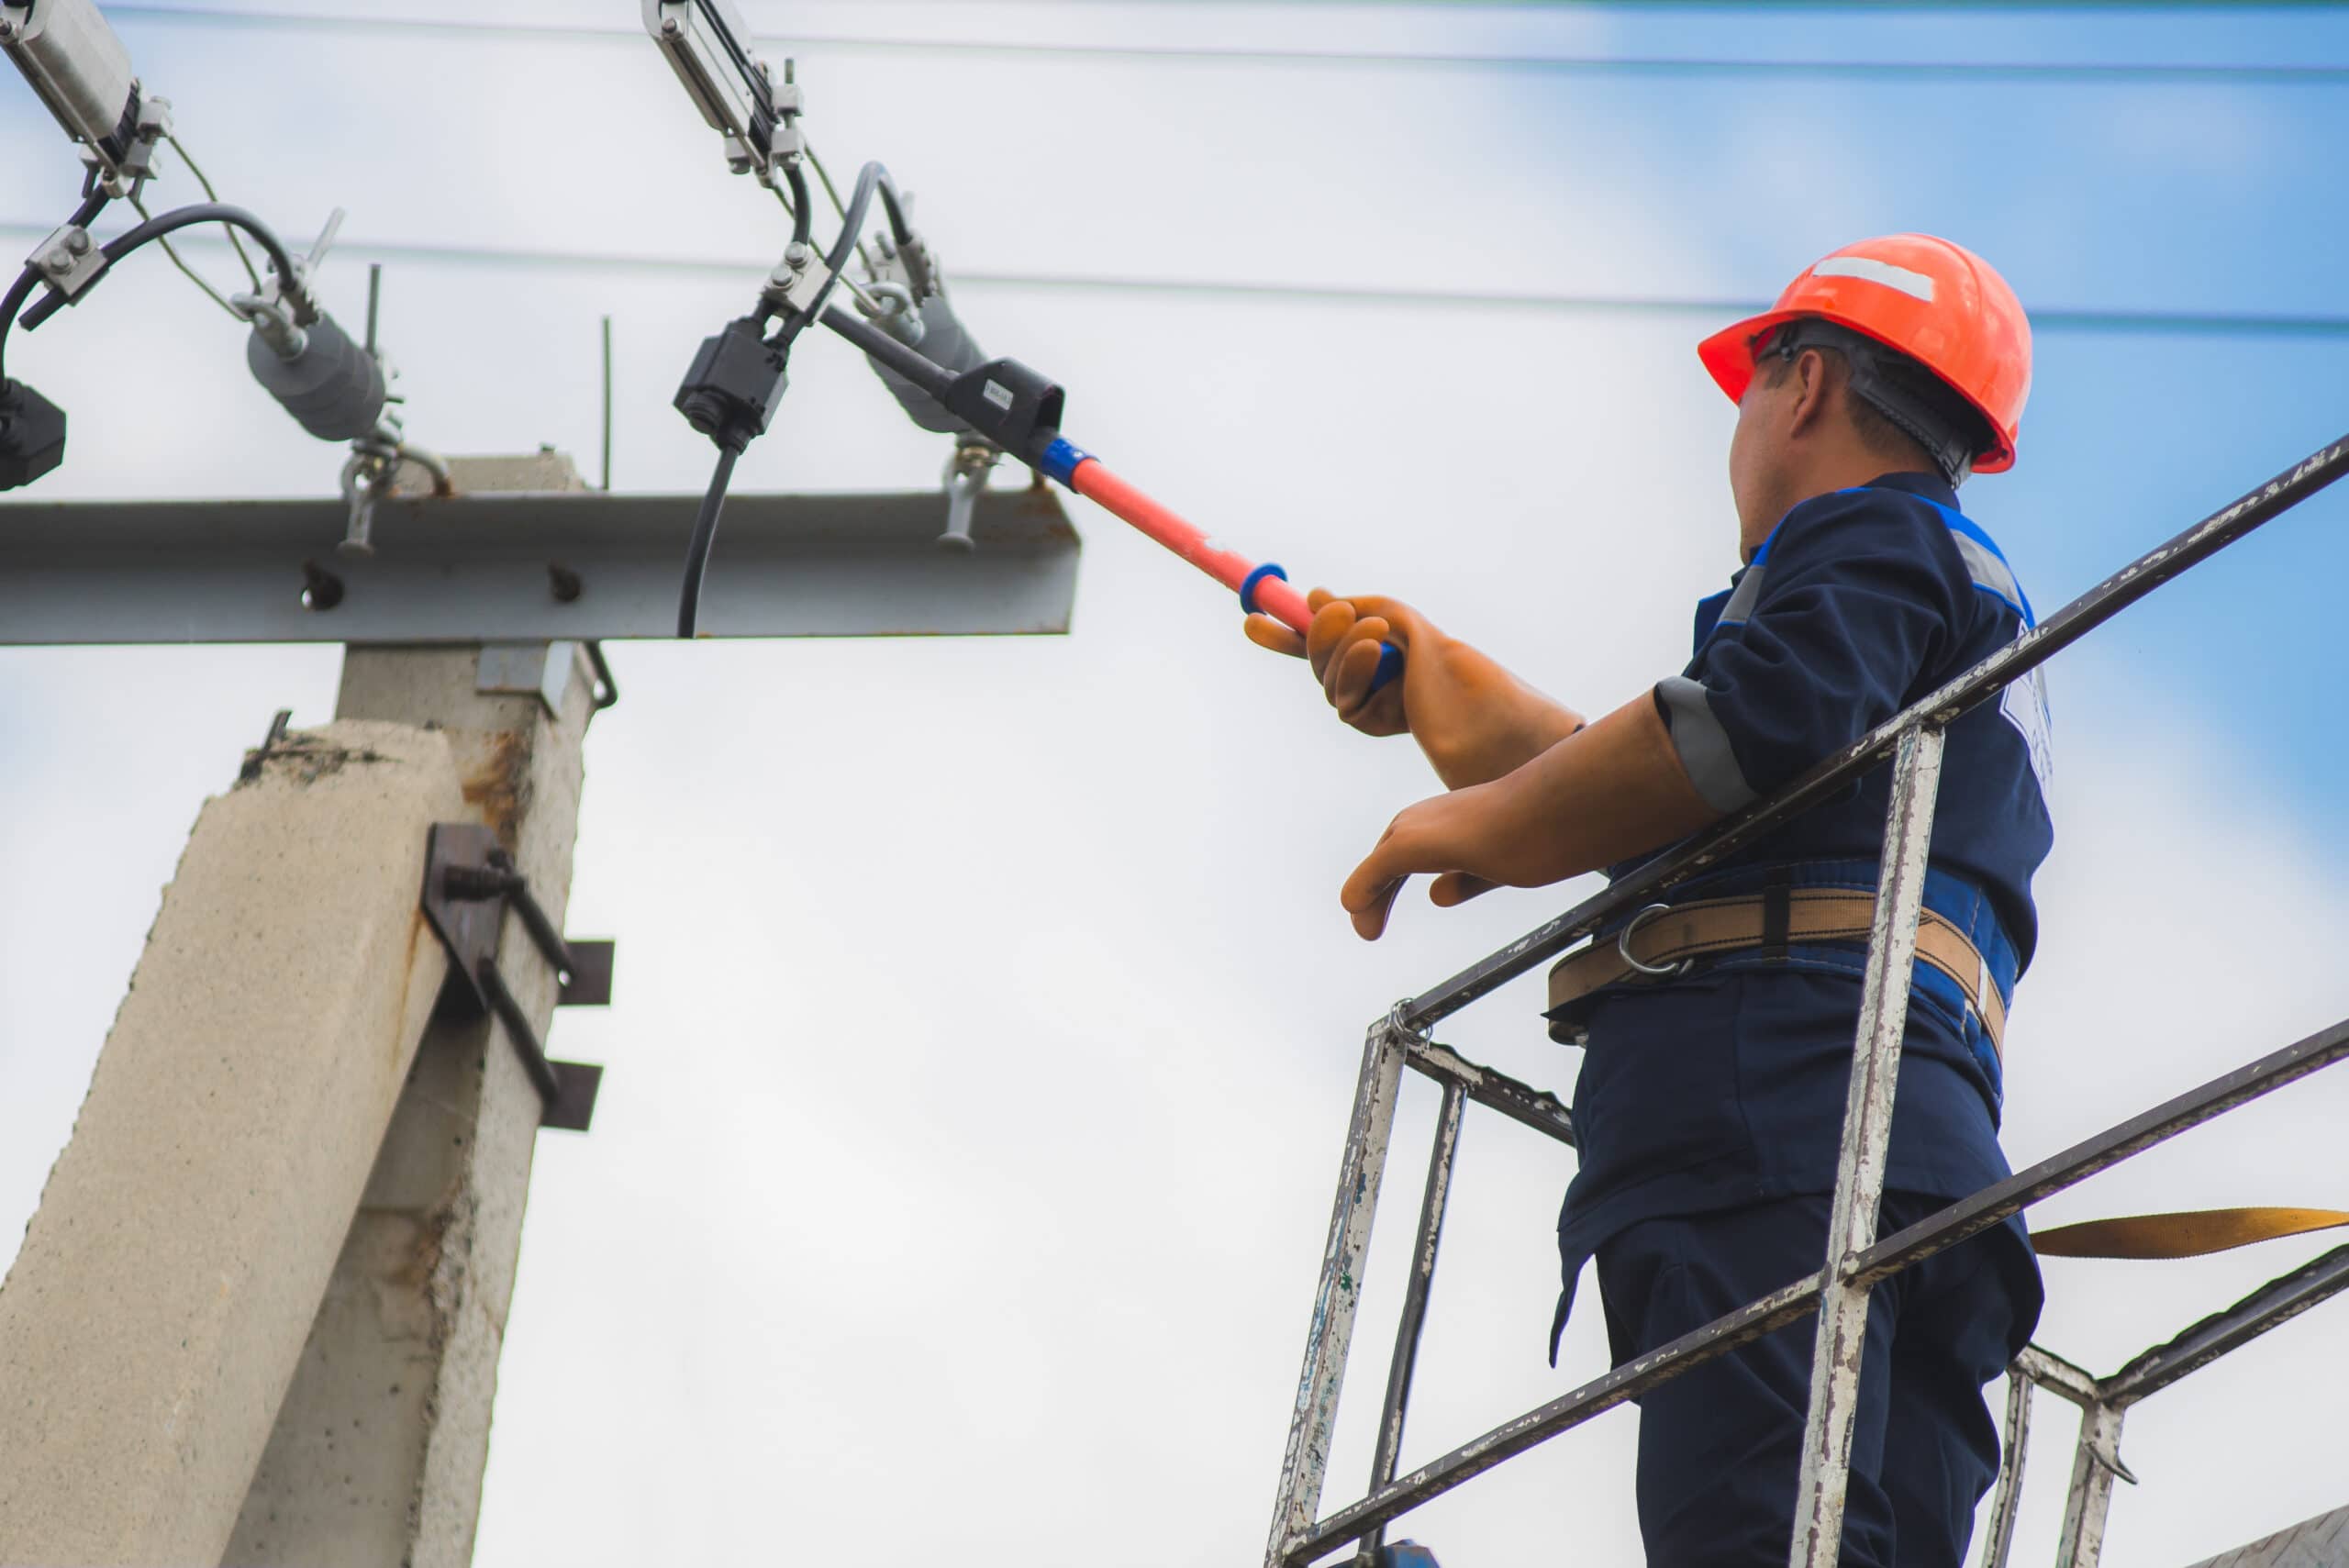 A person wearing a hard hat works on an electrical cable at height.